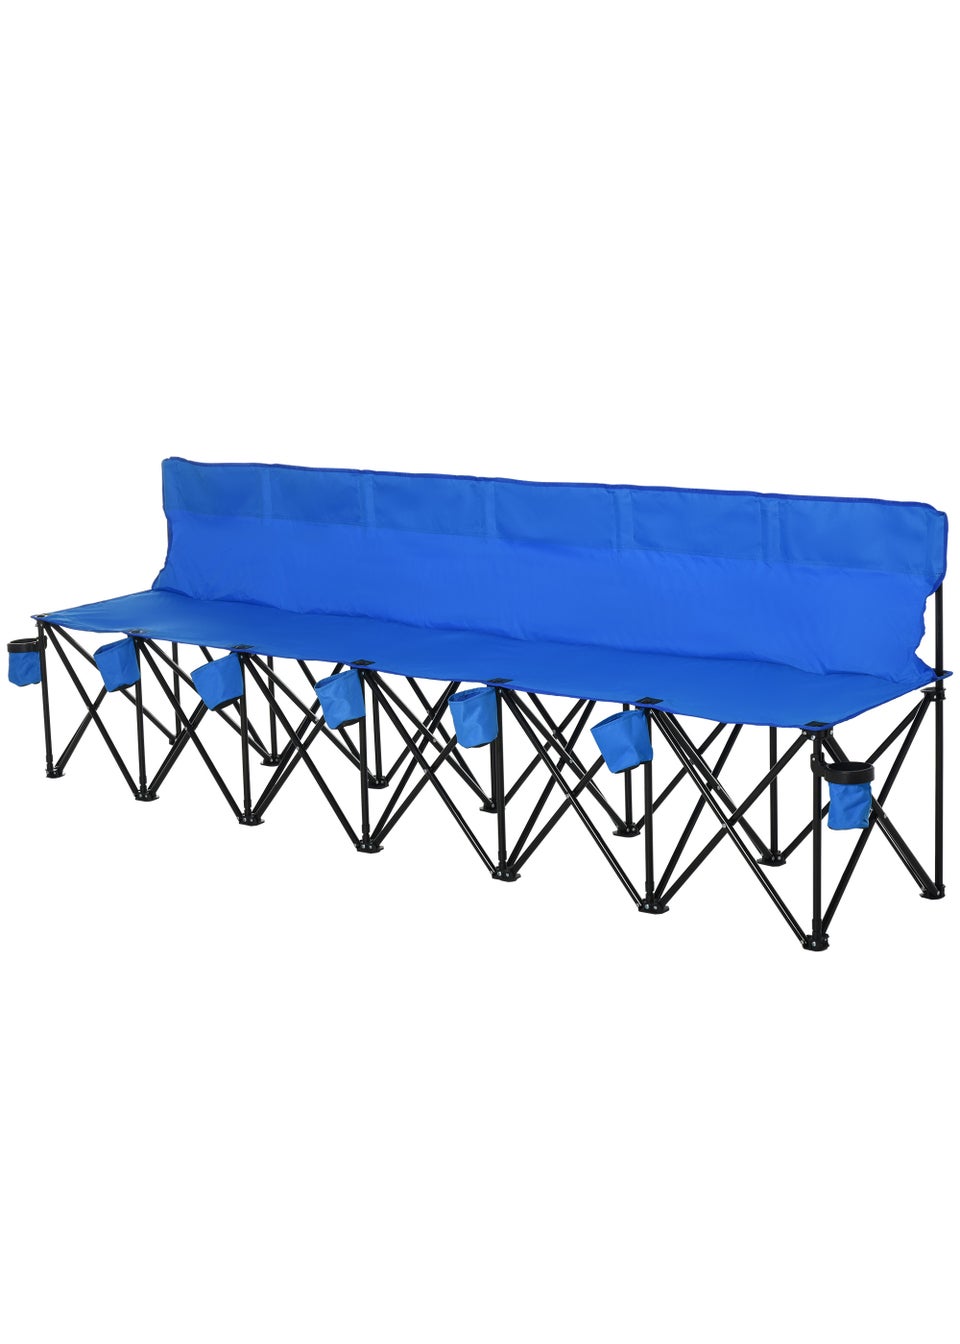 Outsunny Outdoor 6 Seater Folding Bench (259cm x 48cm x 80cm)